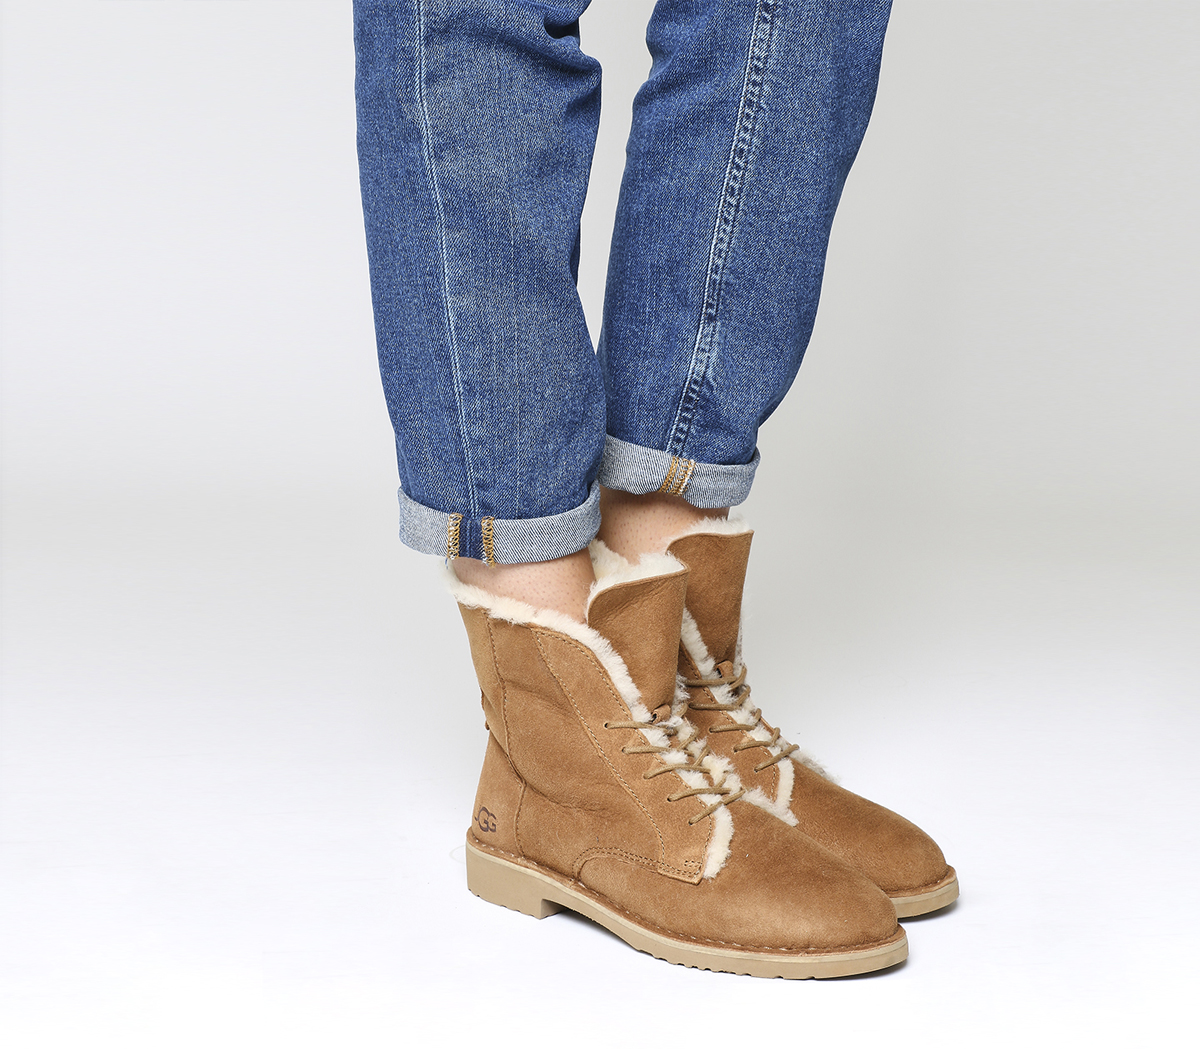 ugg quincy boots sale